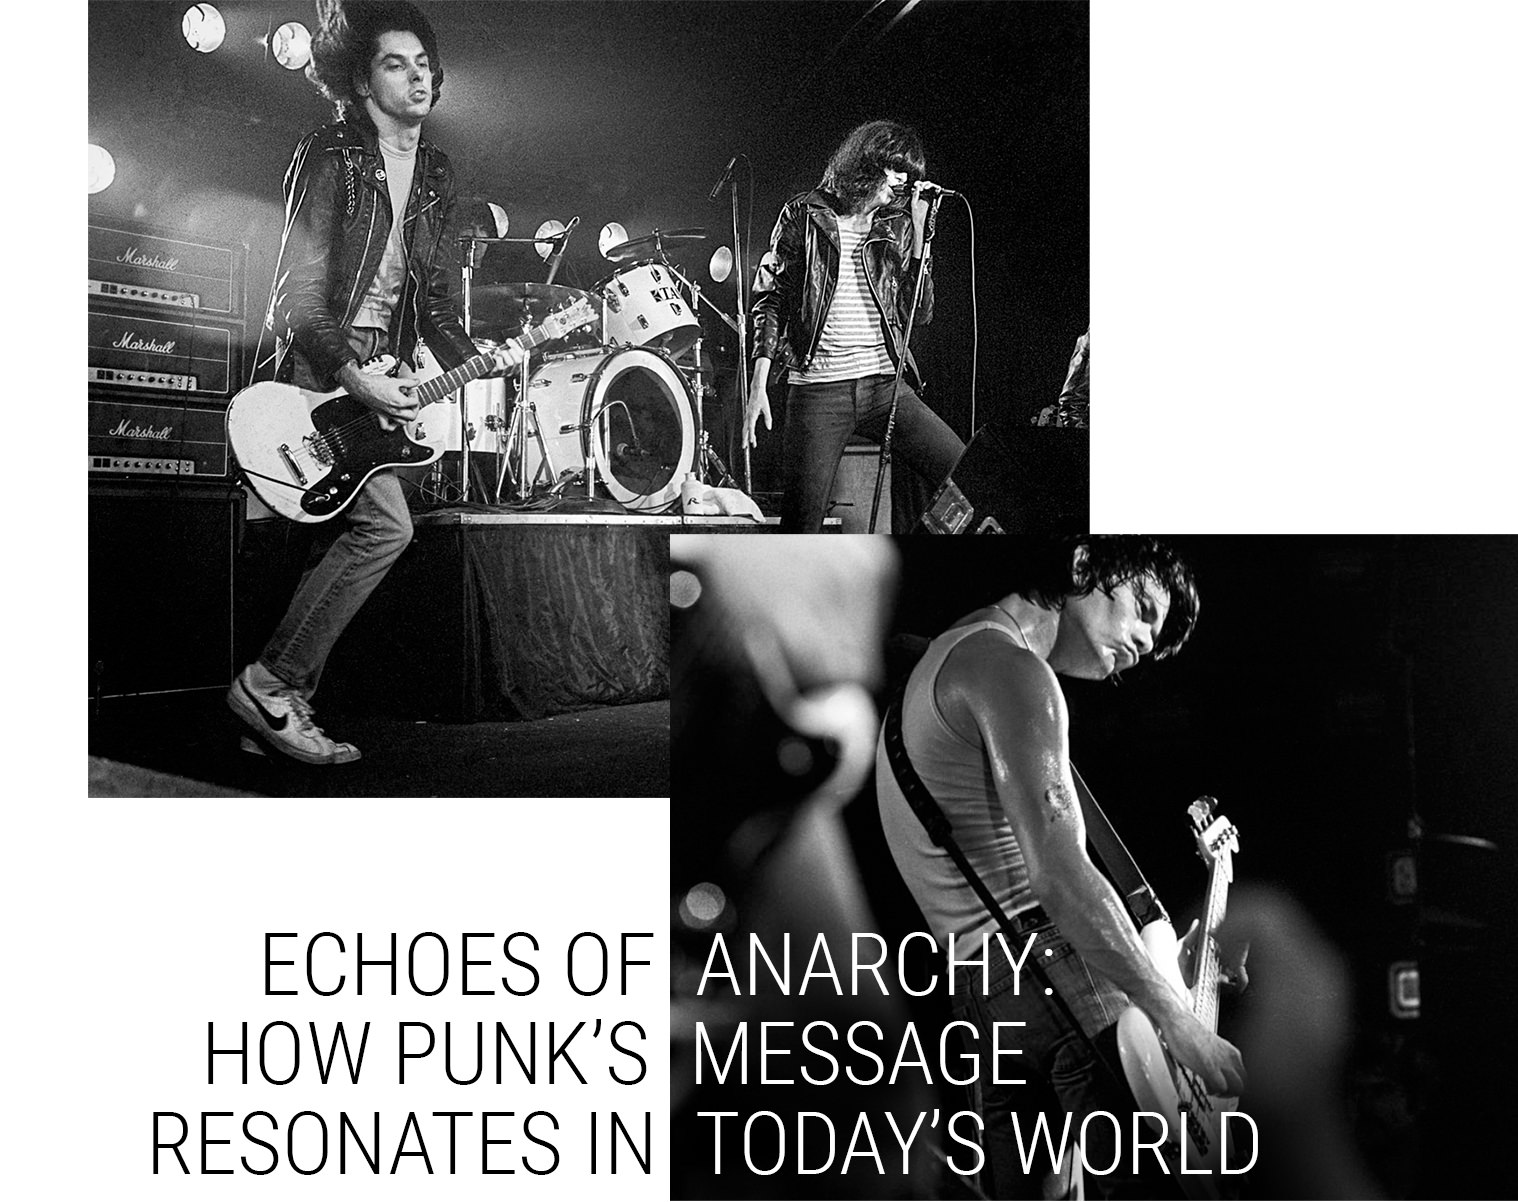 Echoes-of-Anarchy-How-Punks-Message-Resonates-in-Todays-World-header-3.jpg